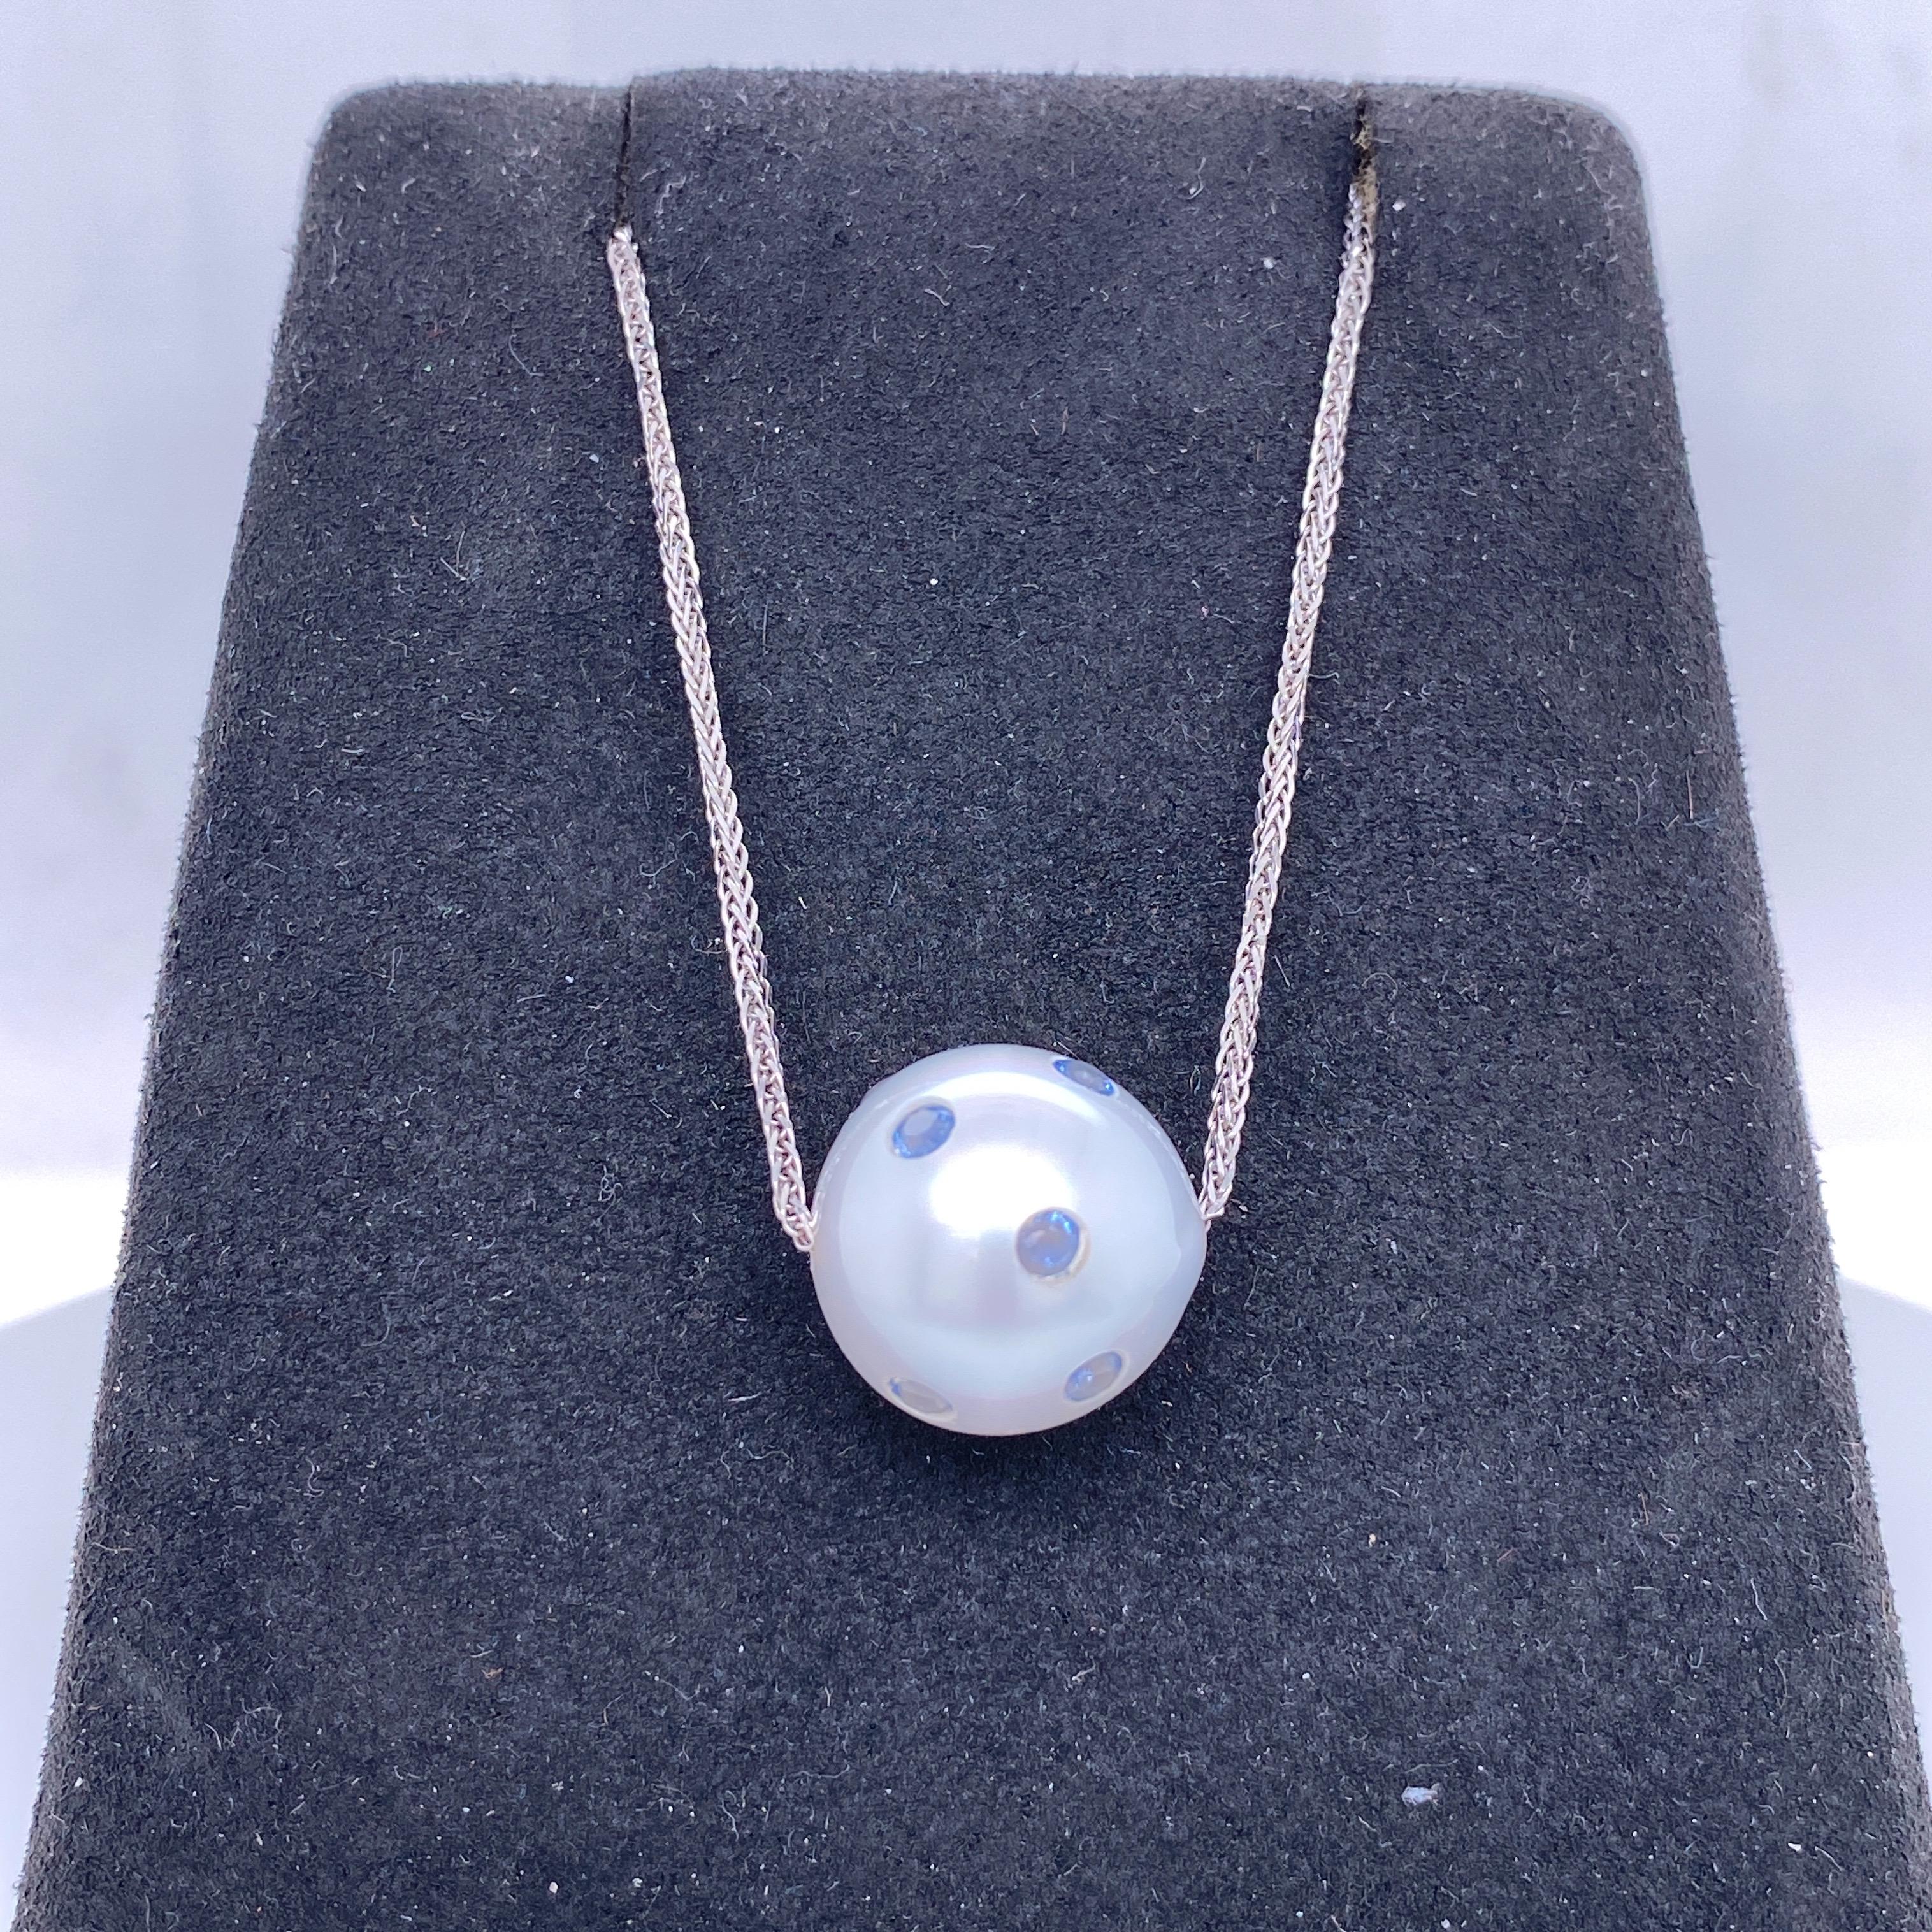 18K White gold slide necklace featuring one South Sea Pearl measuring 14-15 mm with scattered blue sapphires weighing 0.60 carats.